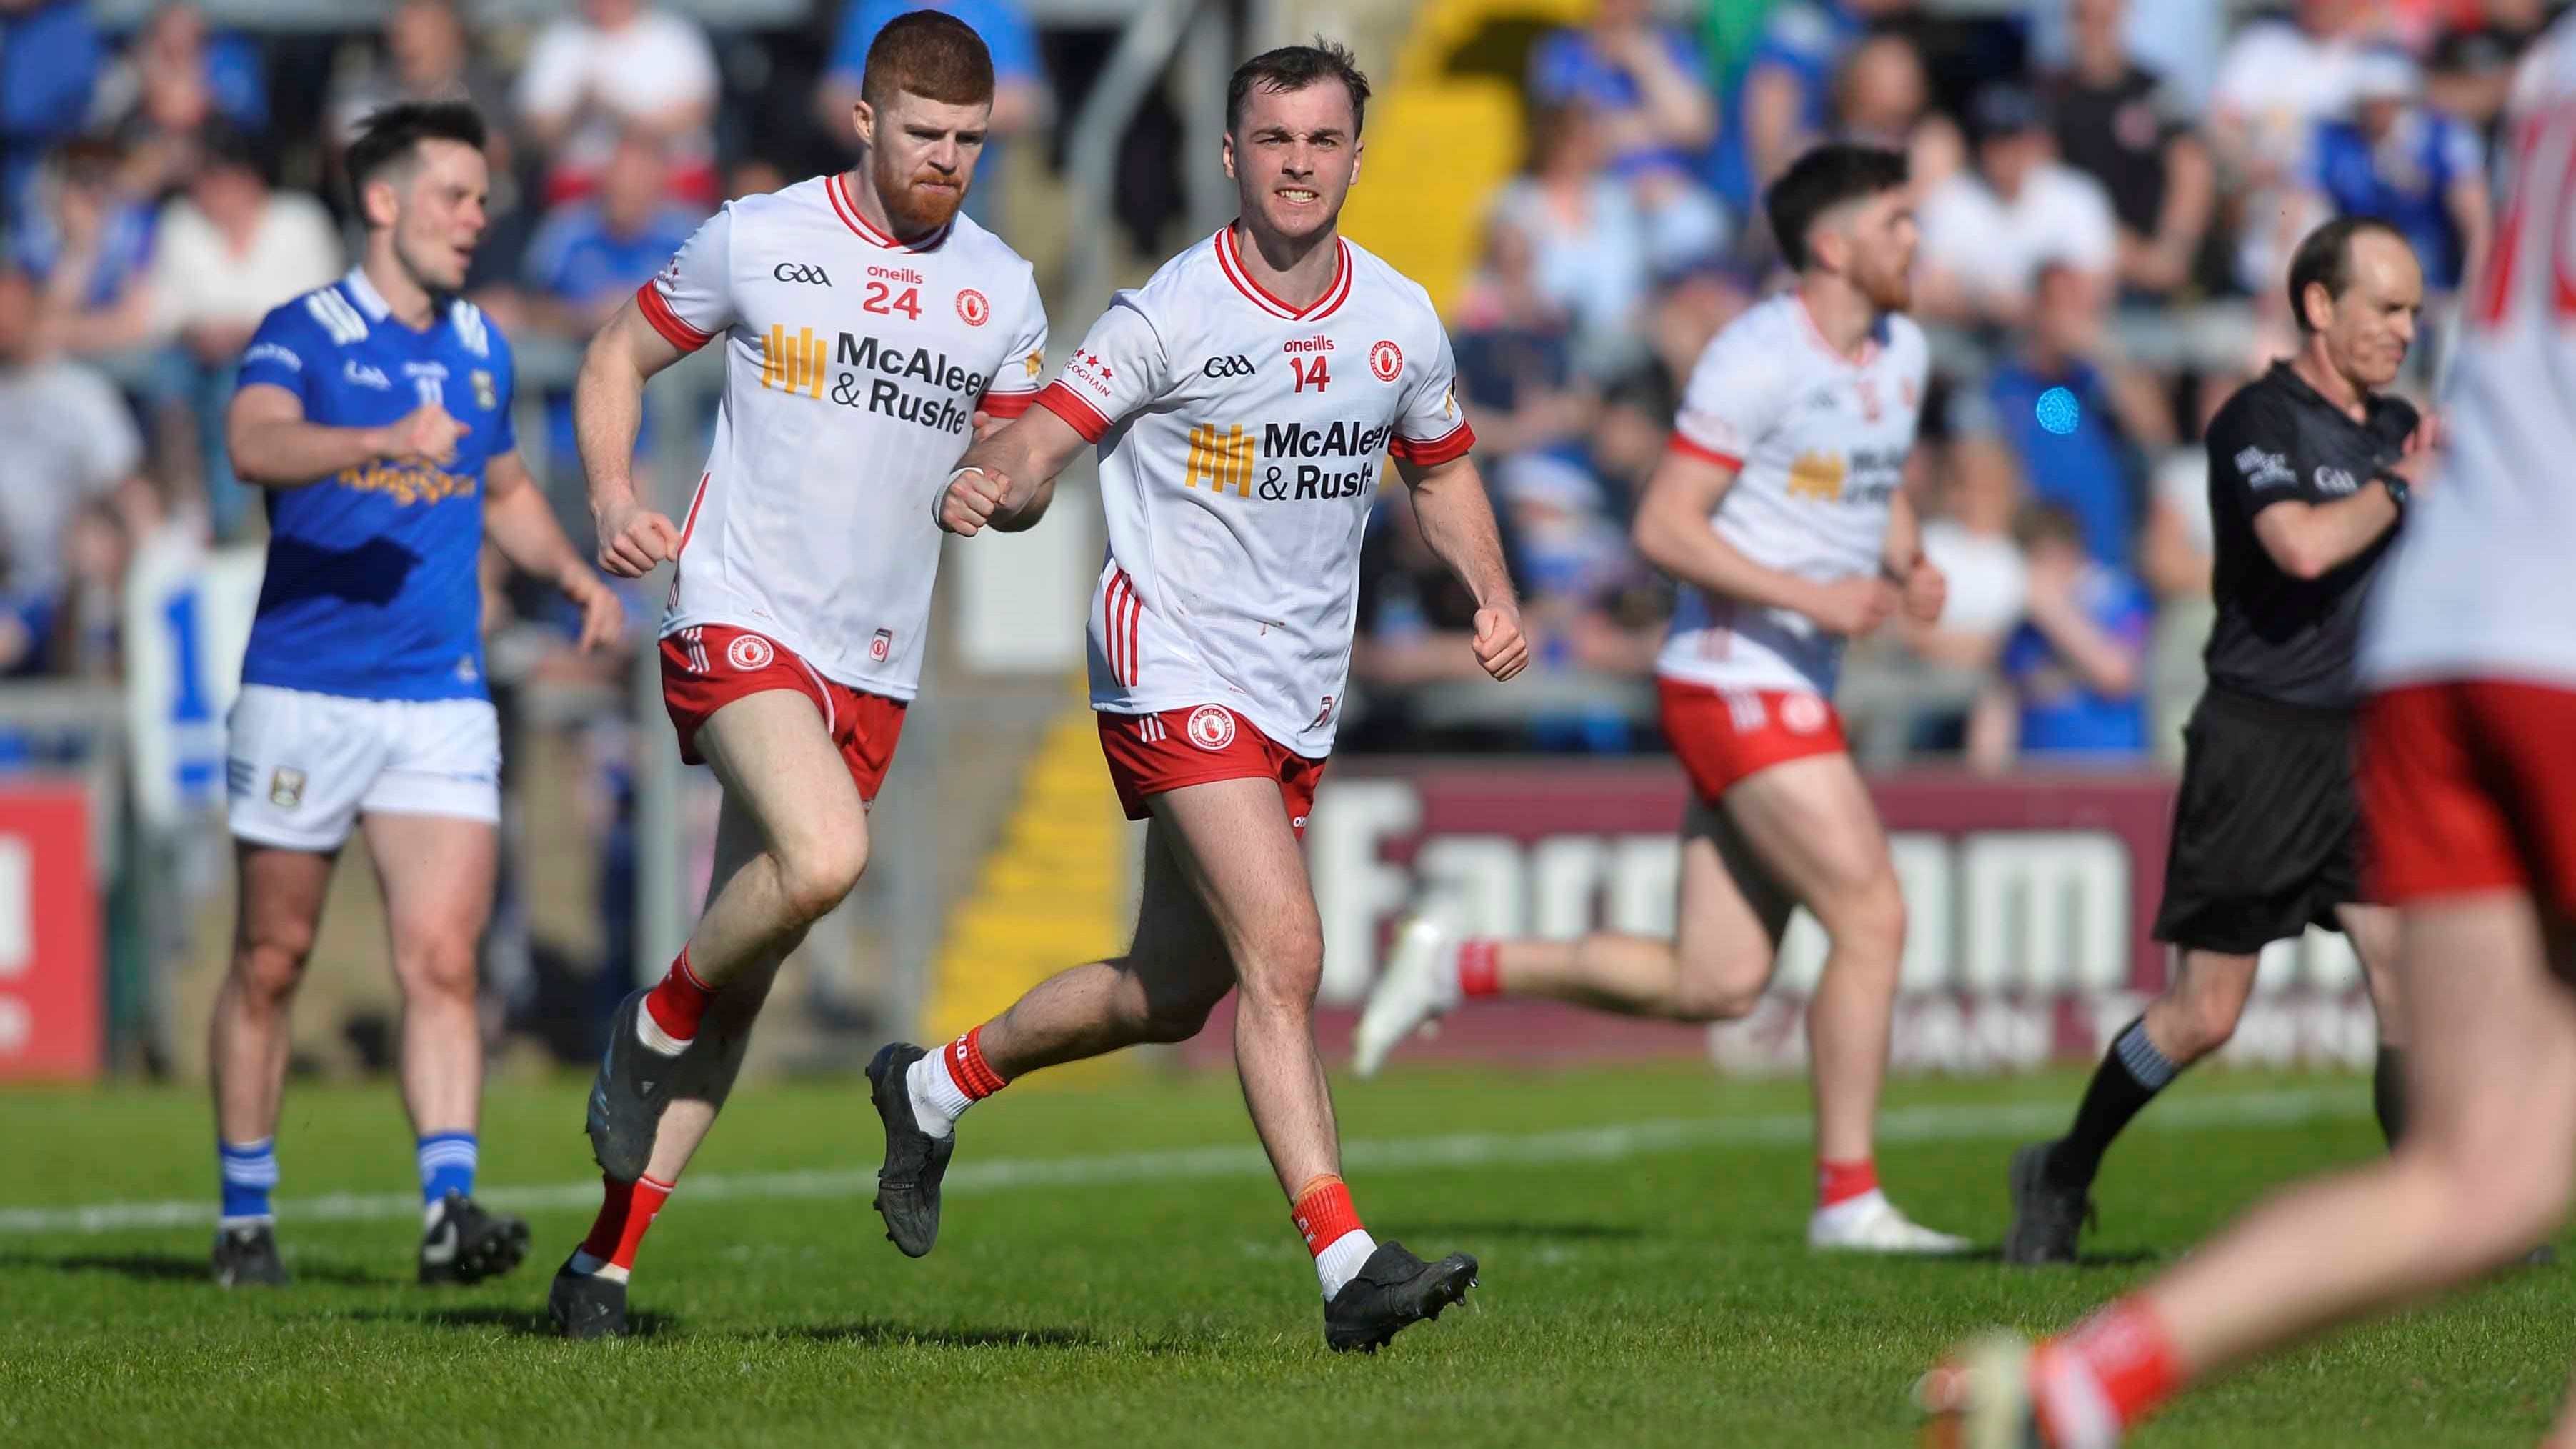 Darragh Canavan clenches his fist to celebrate a crucial score during his superb display that helped Tyrone edge past Cavan in extra-time. Picture: Mark Marlow